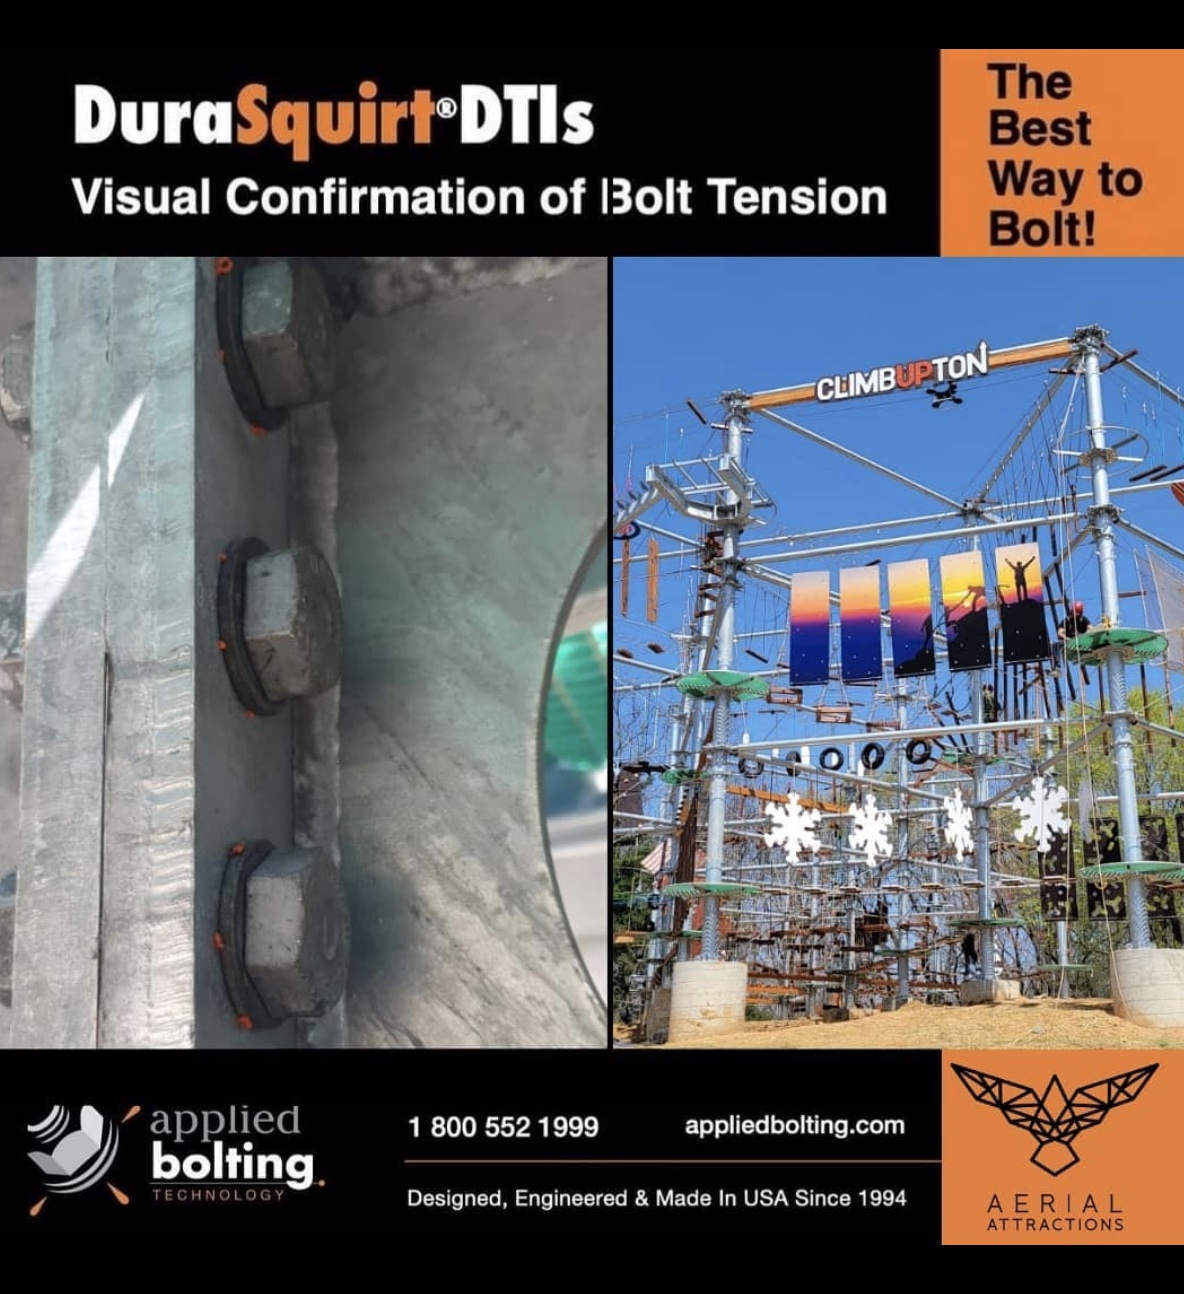 Why Aerial Attractions Uses Applied Bolting’s DuraSquirt® DTIs